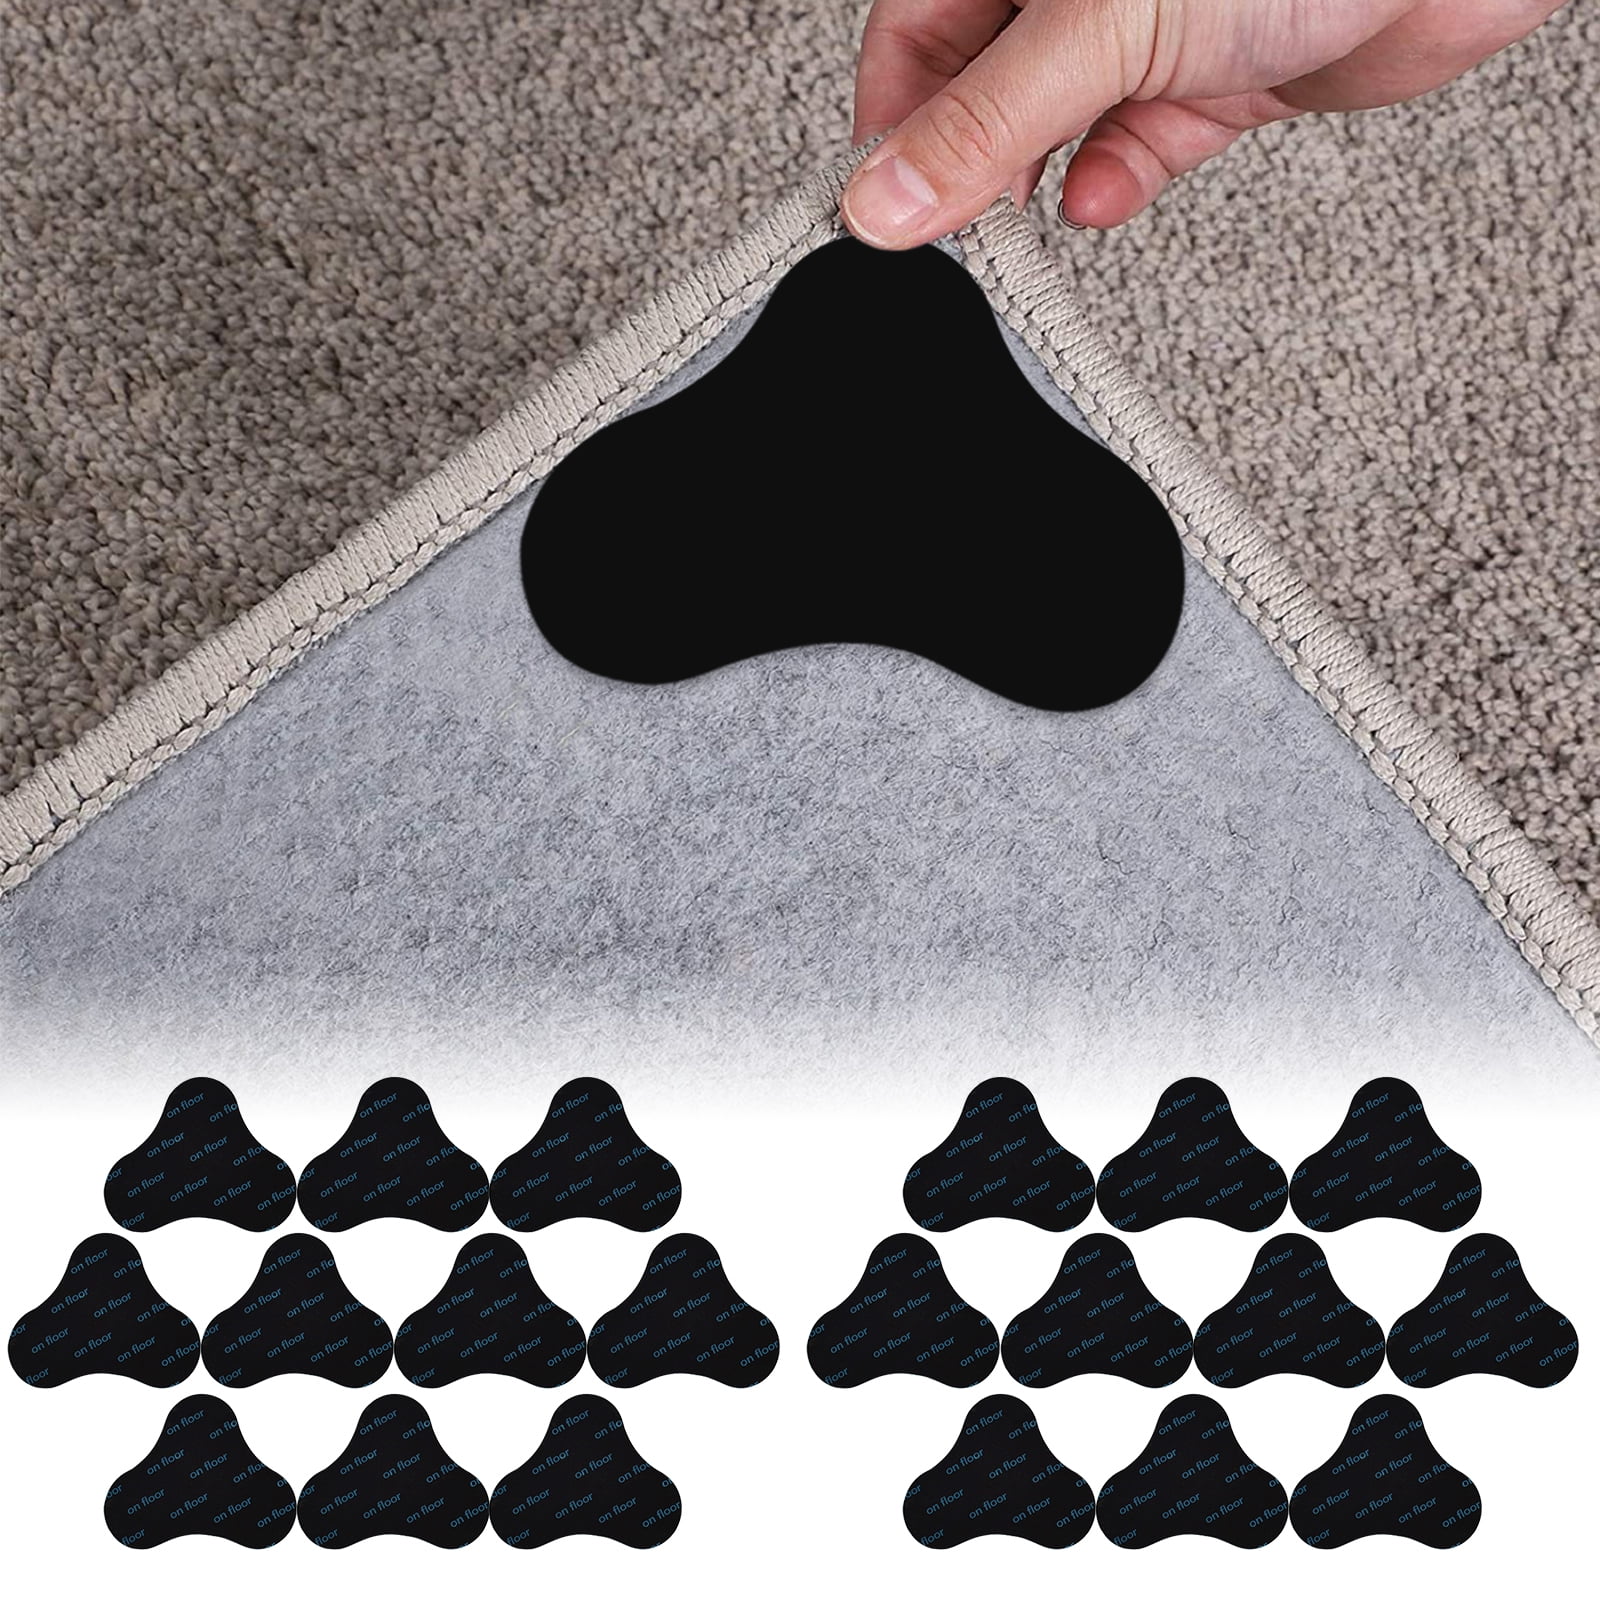 20 10pcs Rug Gripper Non Slip Tsv, How To Clean Rug Pad Residue From Hardwood Floors